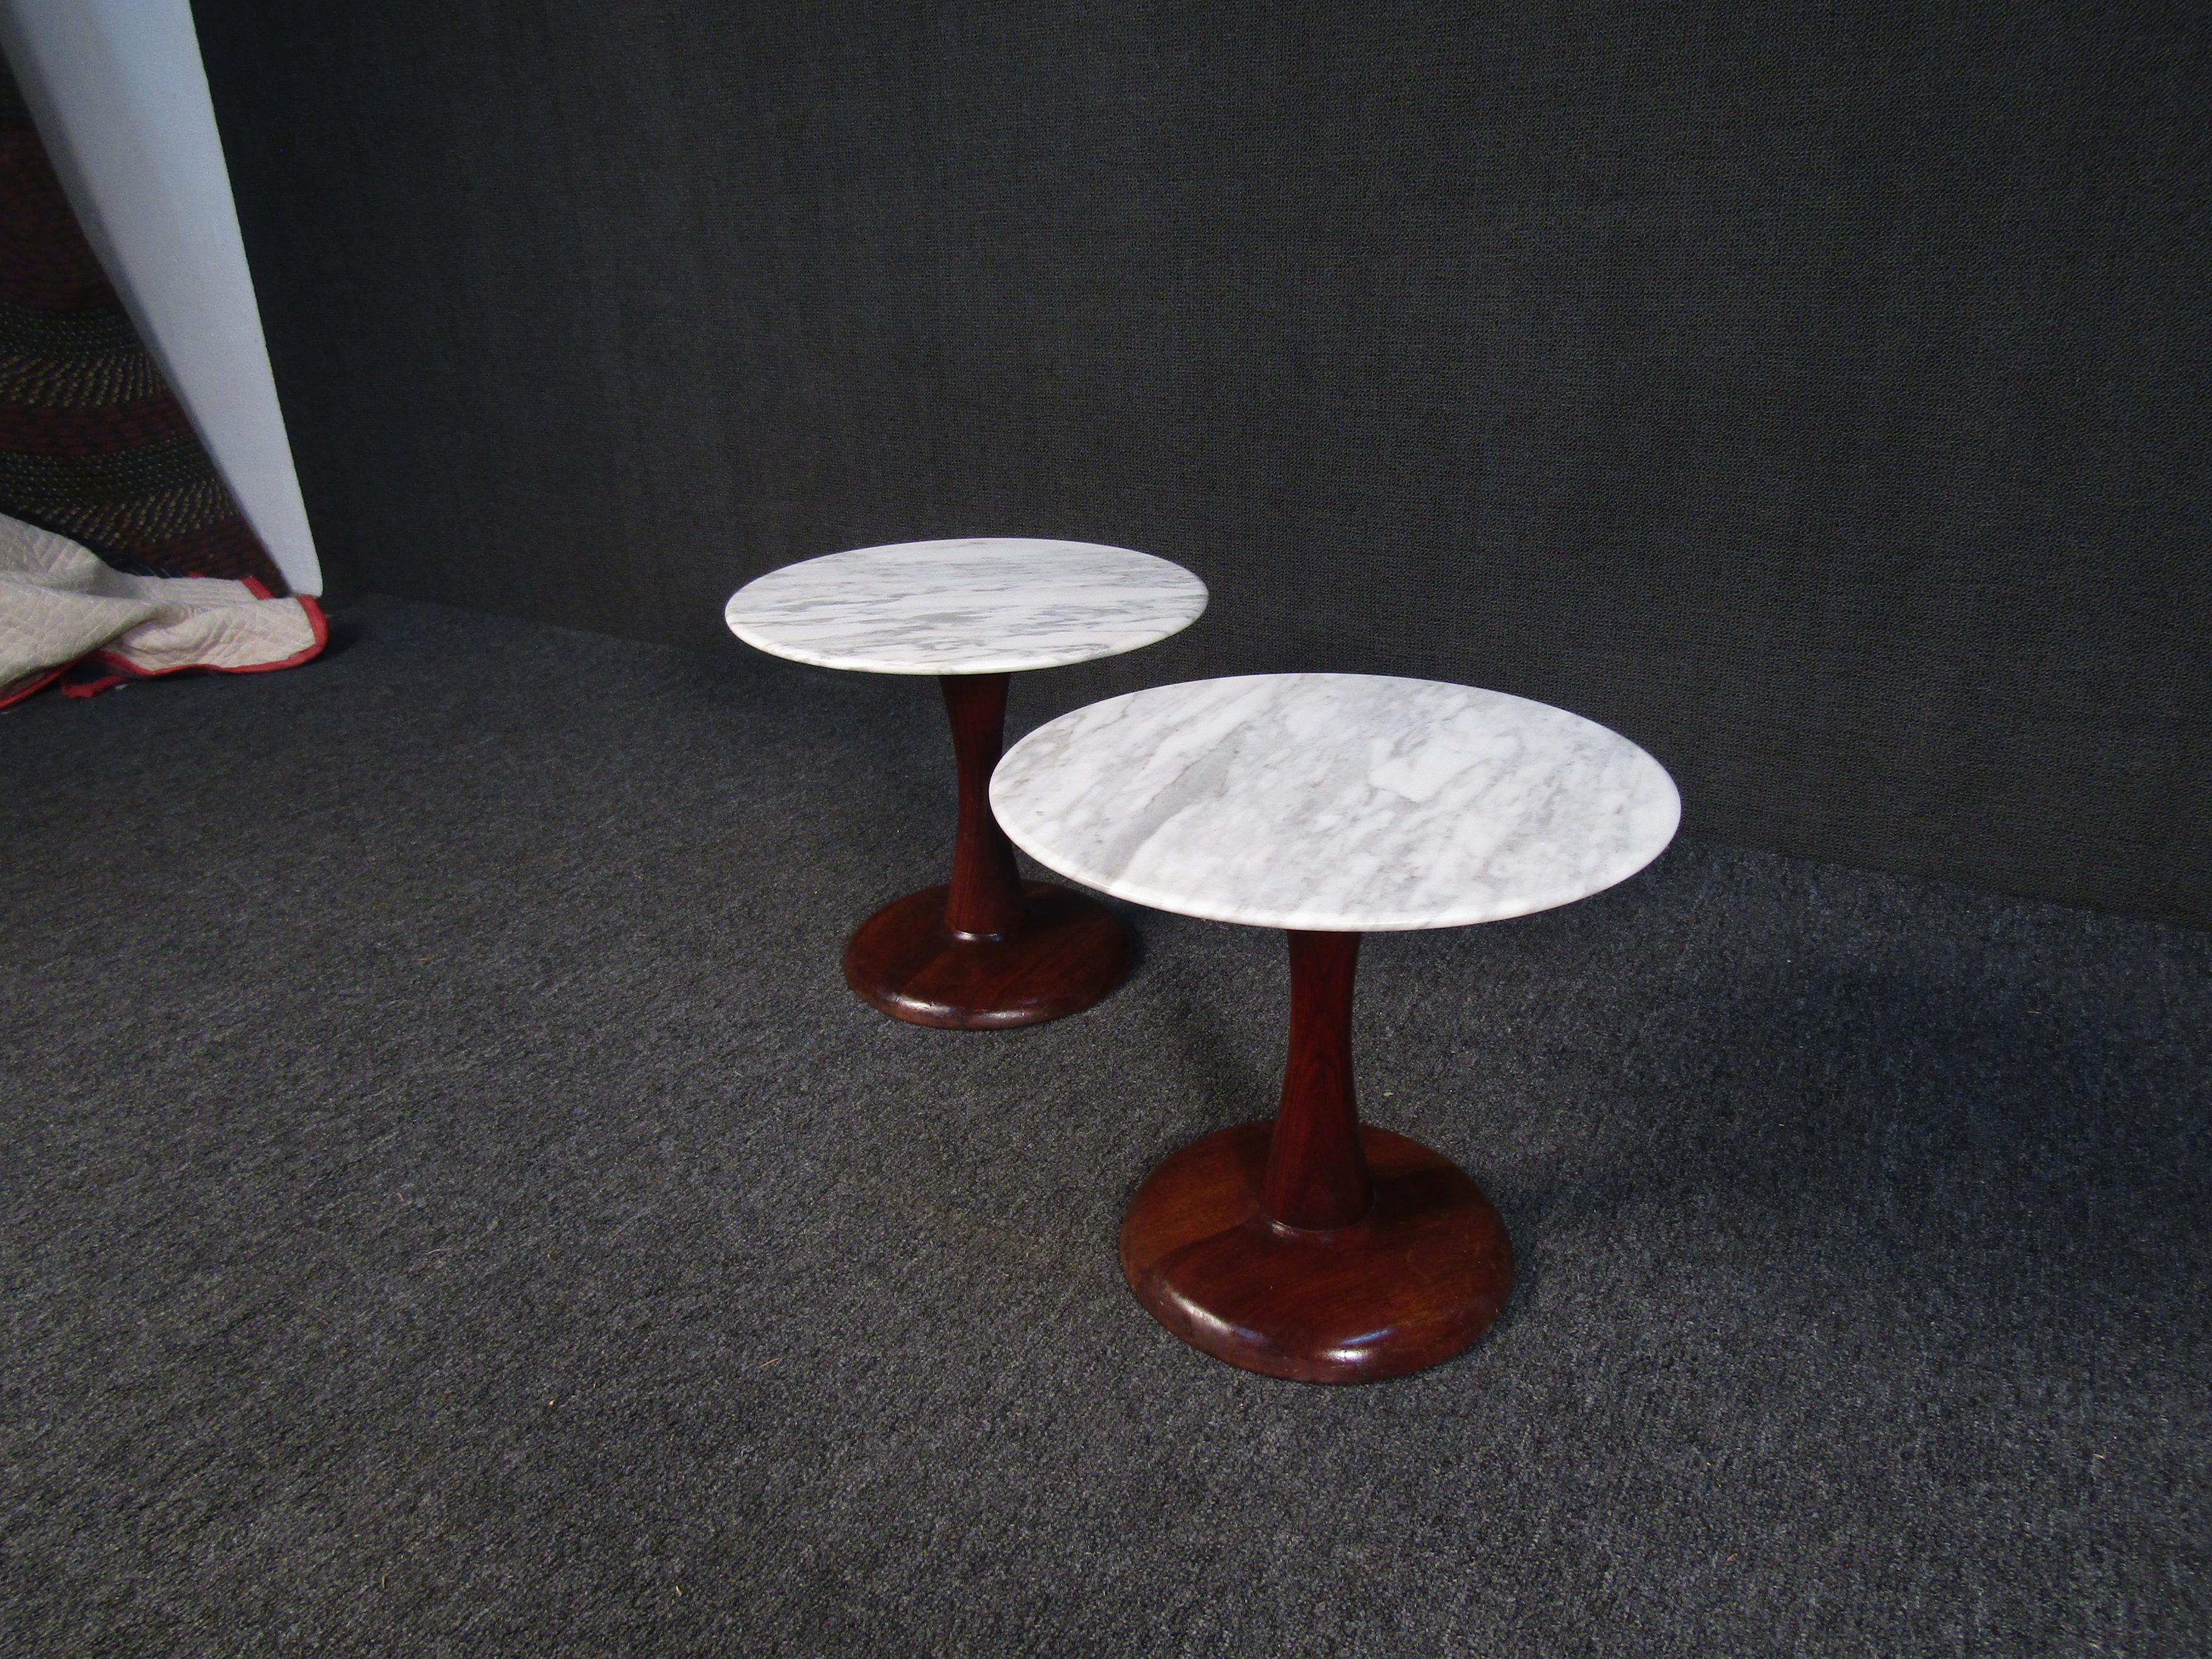 Striking and beautiful pair of vintage end tables in the Danish Modern style. With sculpted walnut bases and round marble tops, this pair of tables is sure to stand out anywhere. Please confirm item location with seller (NY/NJ).